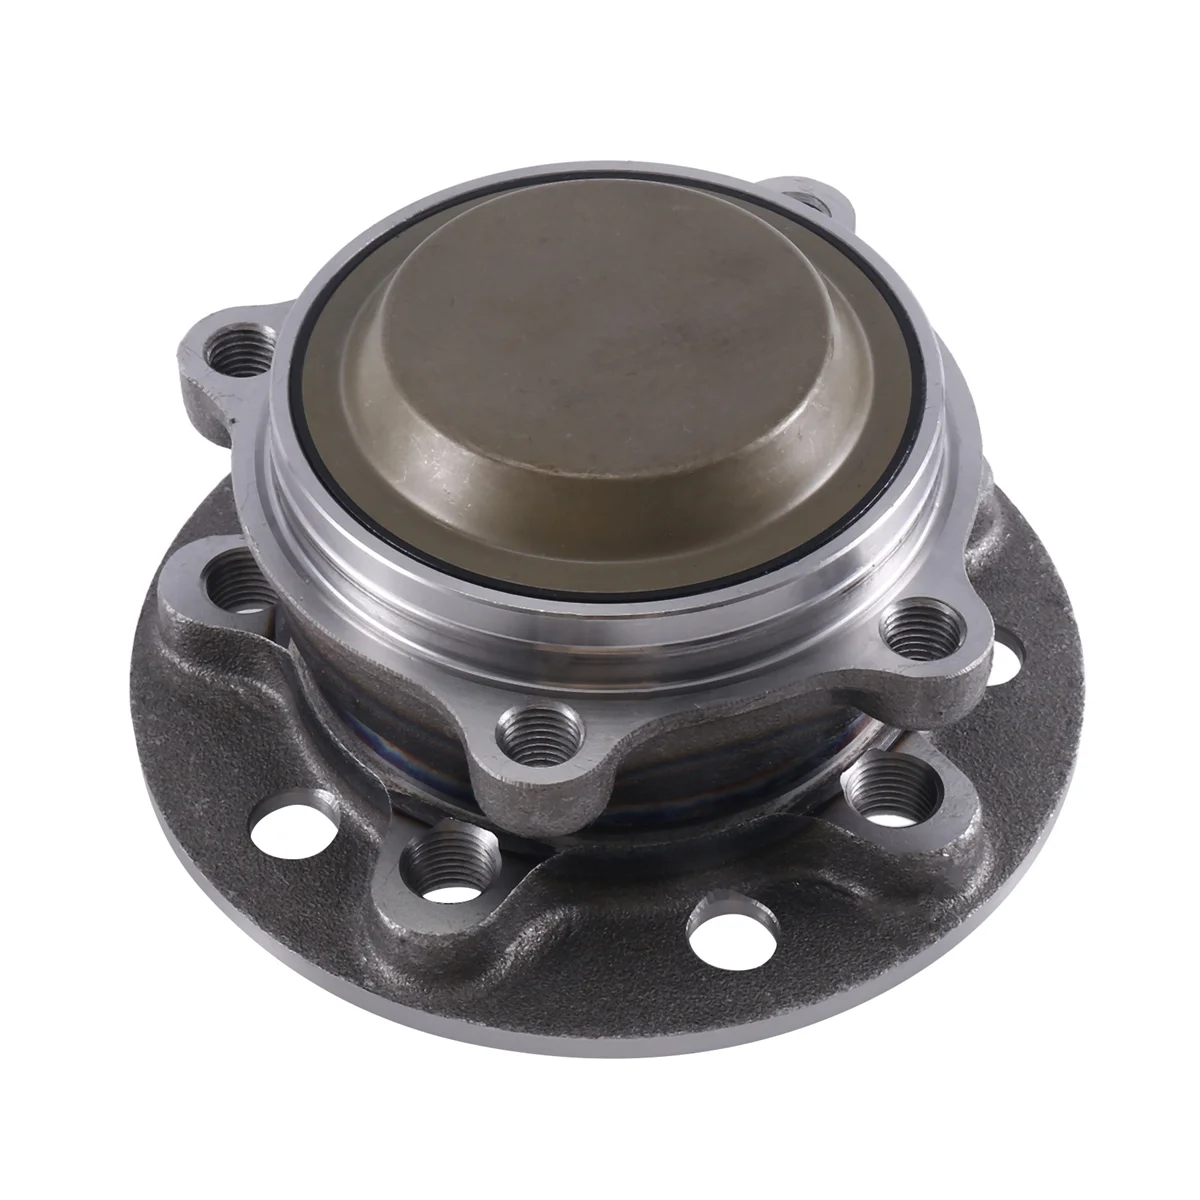 

2053340400 Car Front Wheel Hub and Bearing for Mercedes-Benz C CLS E GLC Class W205 C300 2053340200